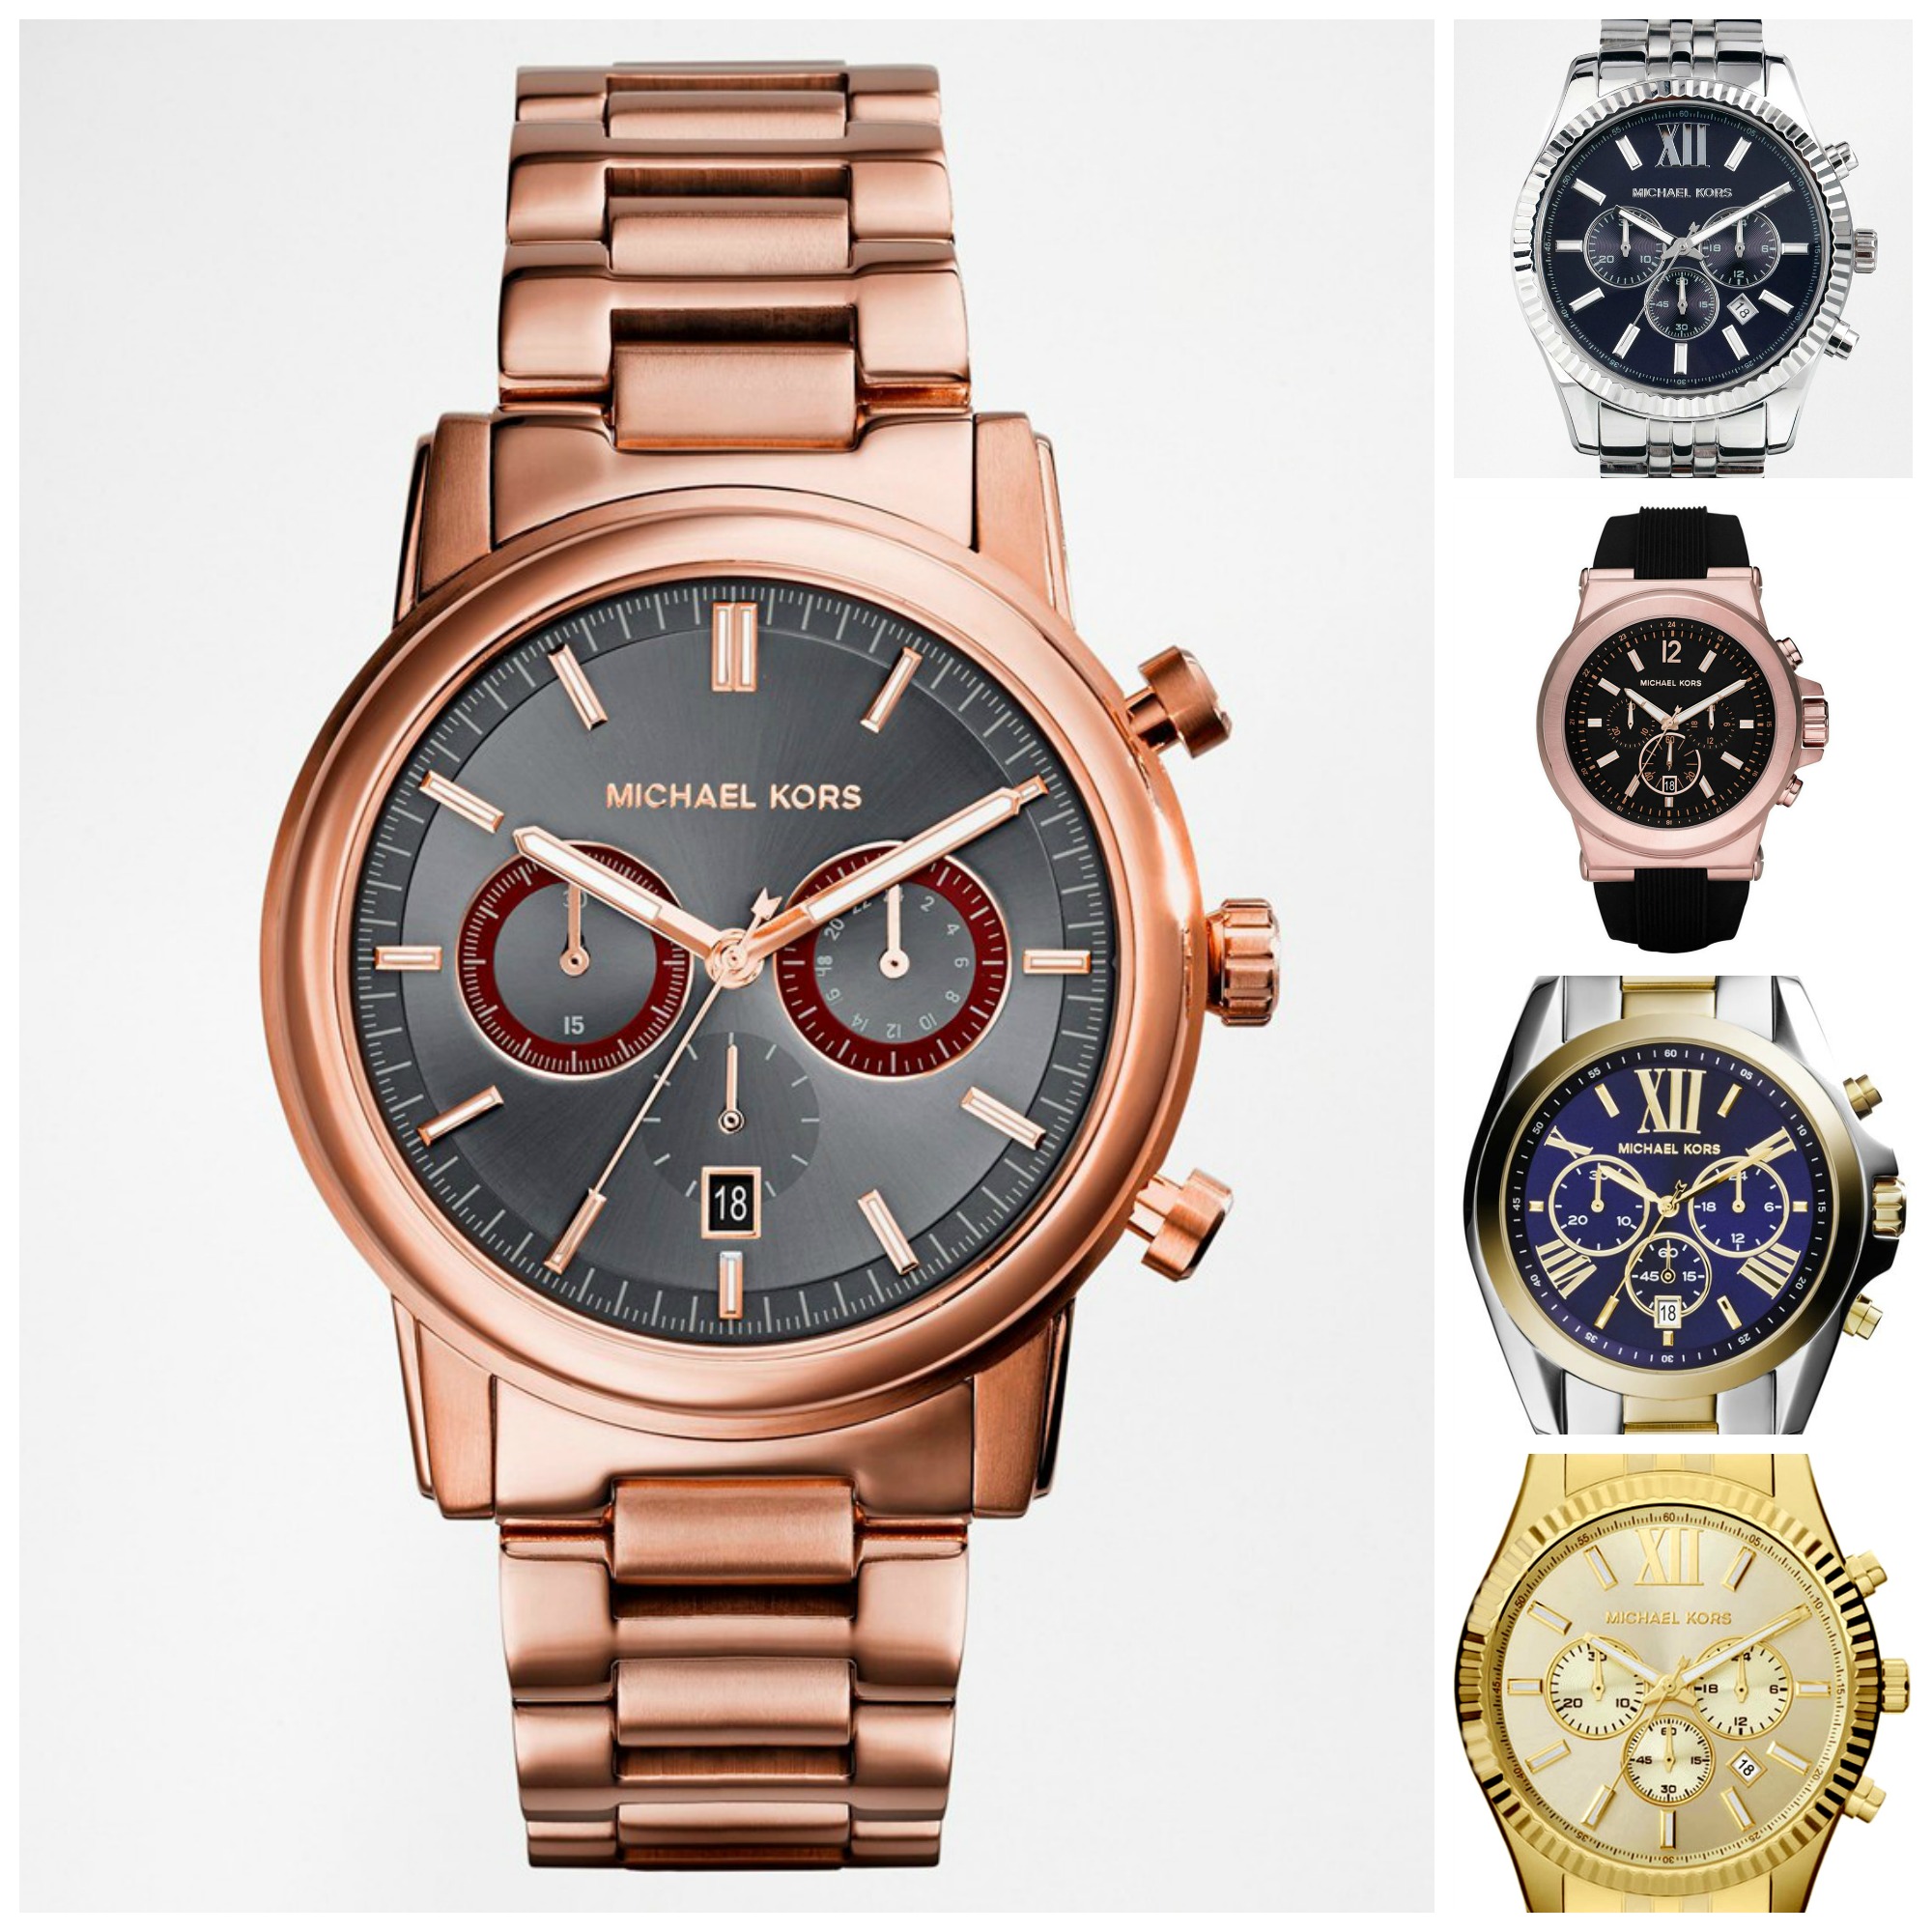 10 Most Popular Michael Kors Watches Under £200 For Men - The Watch Blog